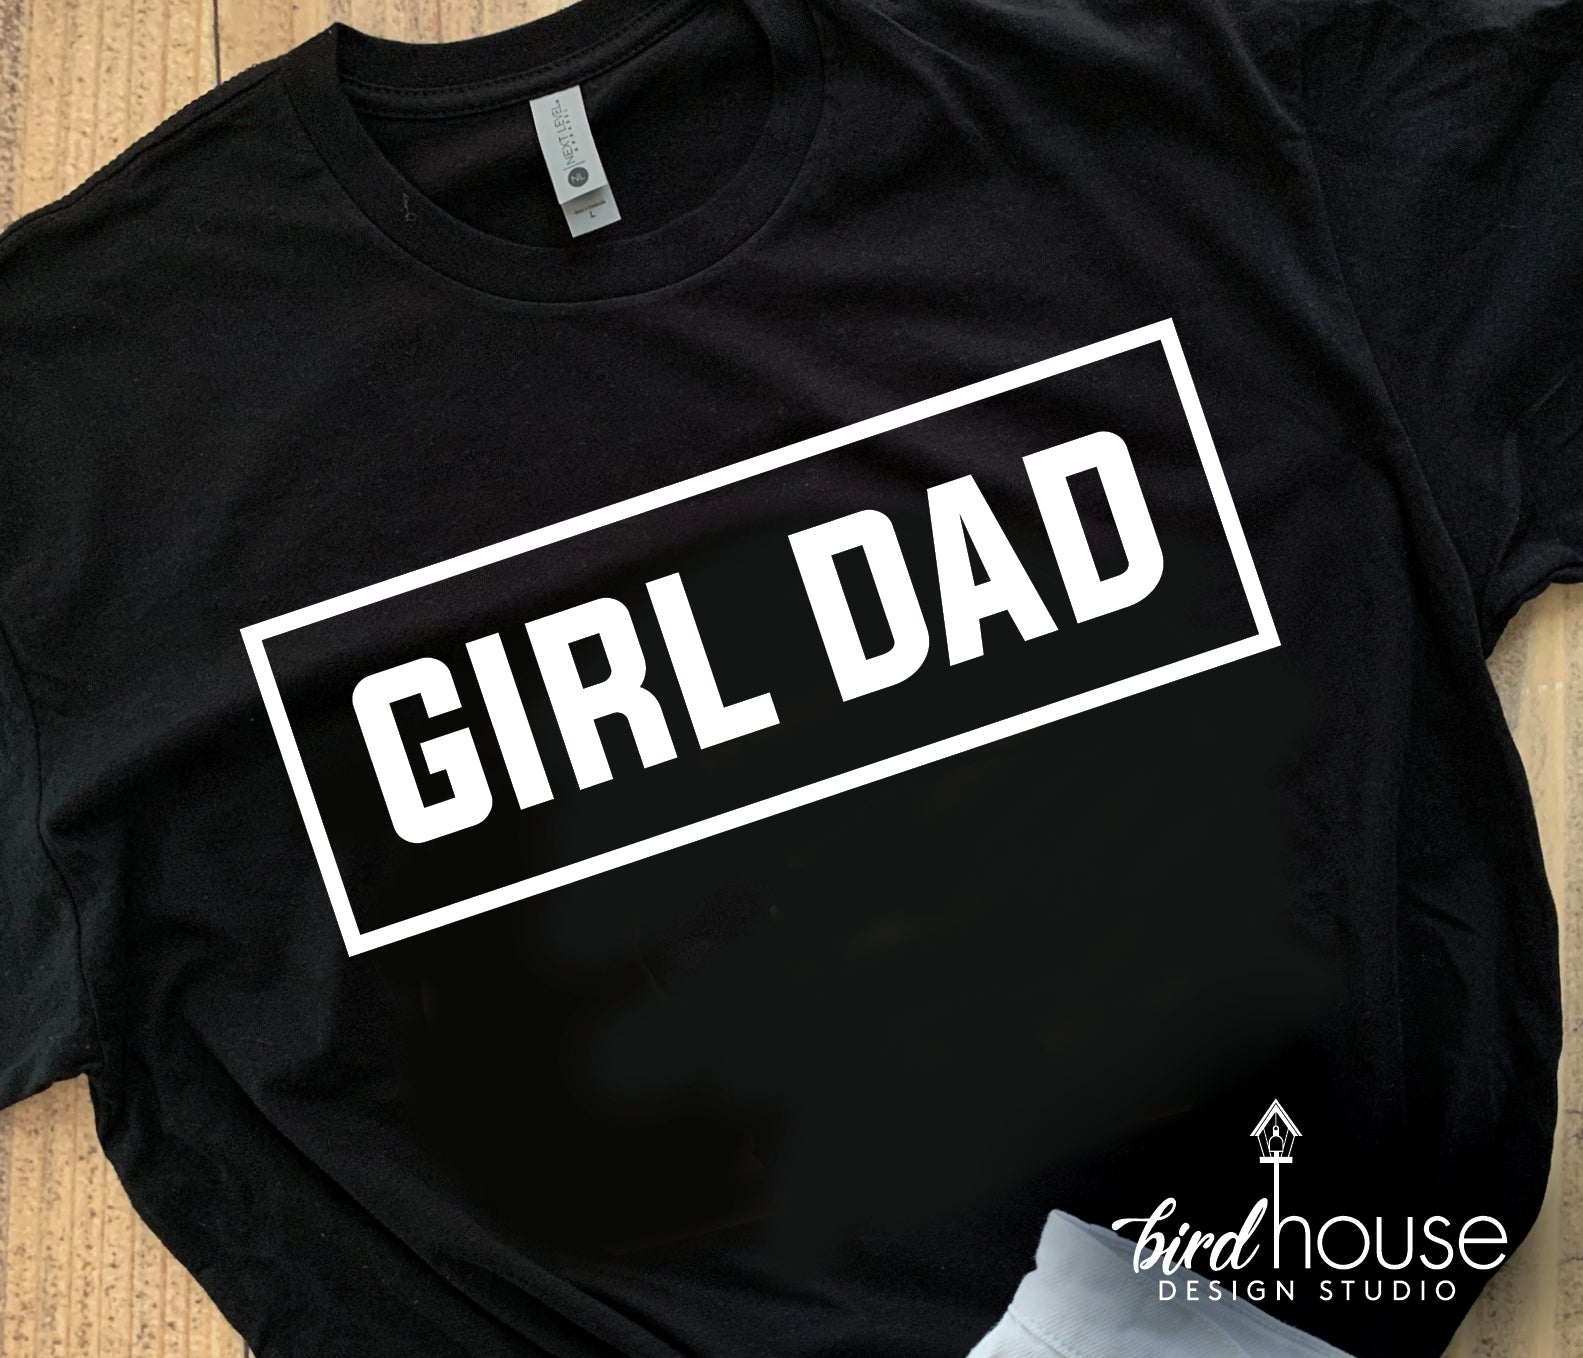 Family Panda Best Christmas Gift Ideas for Dad, Personalized Baby Face Girldad Girl Dad Gift for Dad Girl Dad T Shirt, T-Shirt / Ash / 4XL, Birthday Gifts for Dad